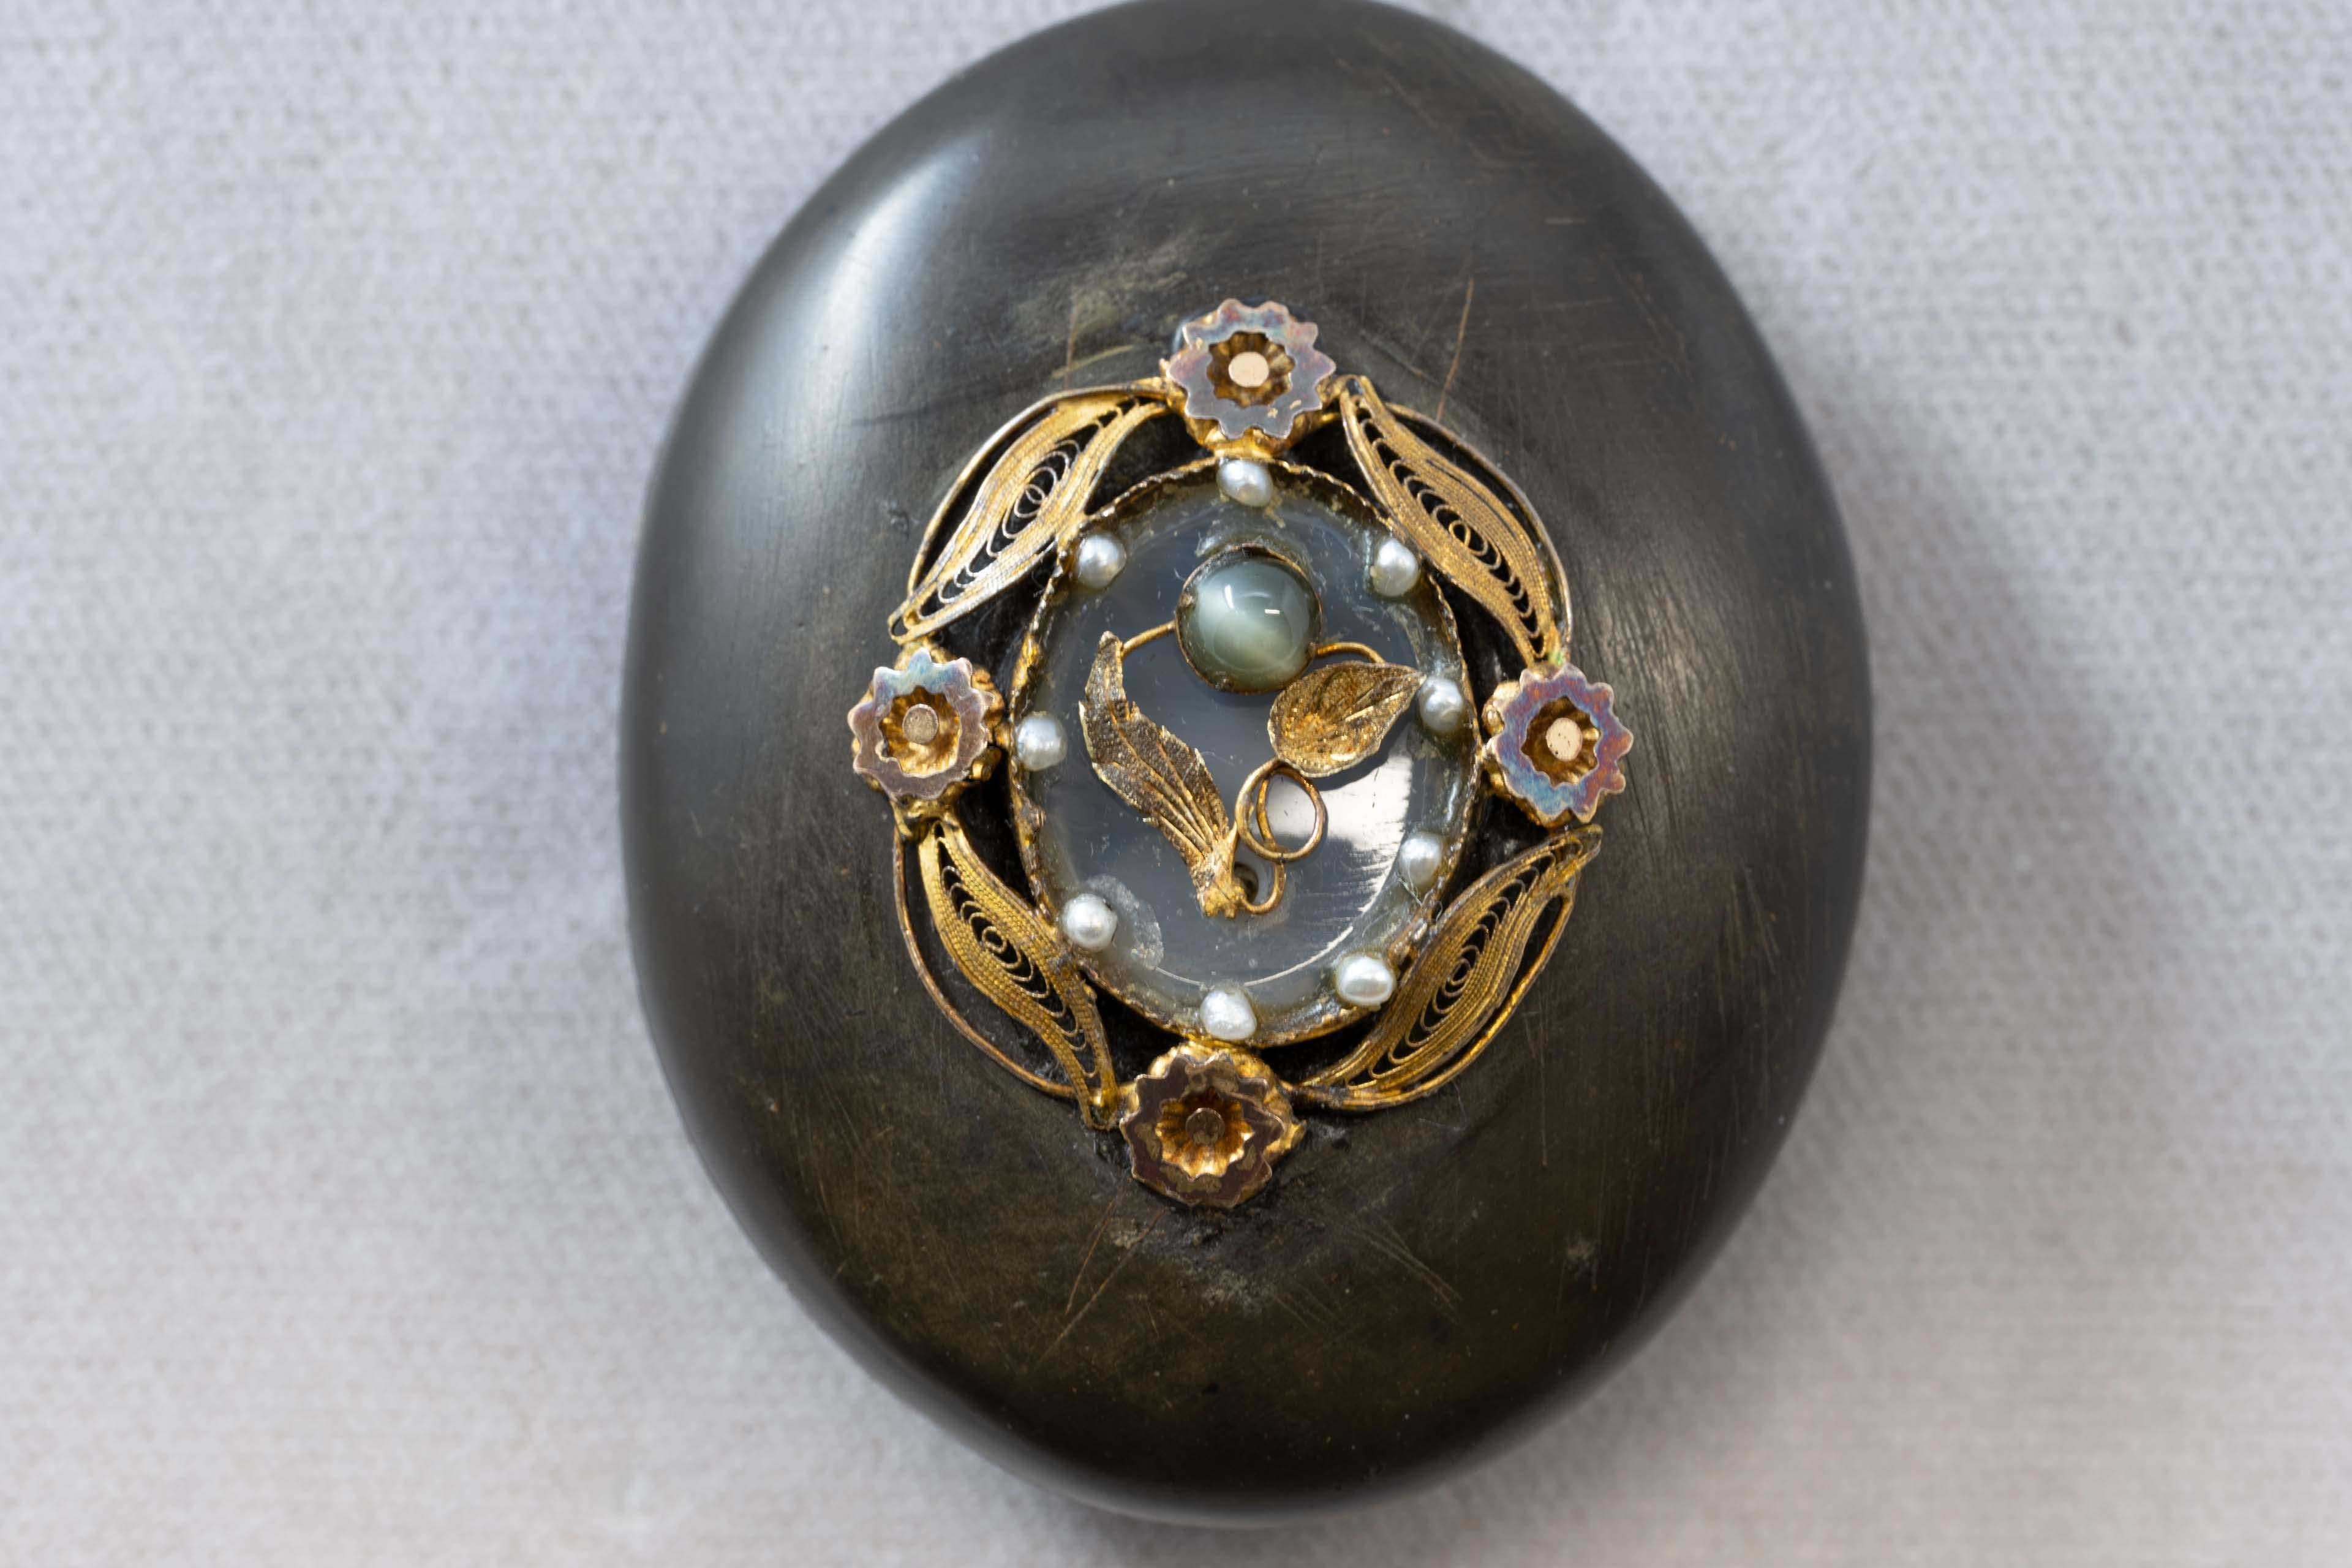 Antique Gutta Percha pendant locket decorated with rock crystal, 14k gold, sead pearls and tiger eye stone. Made mid 19th century, measures 52mm long x 41 mm wide, not marked. In good condition.
